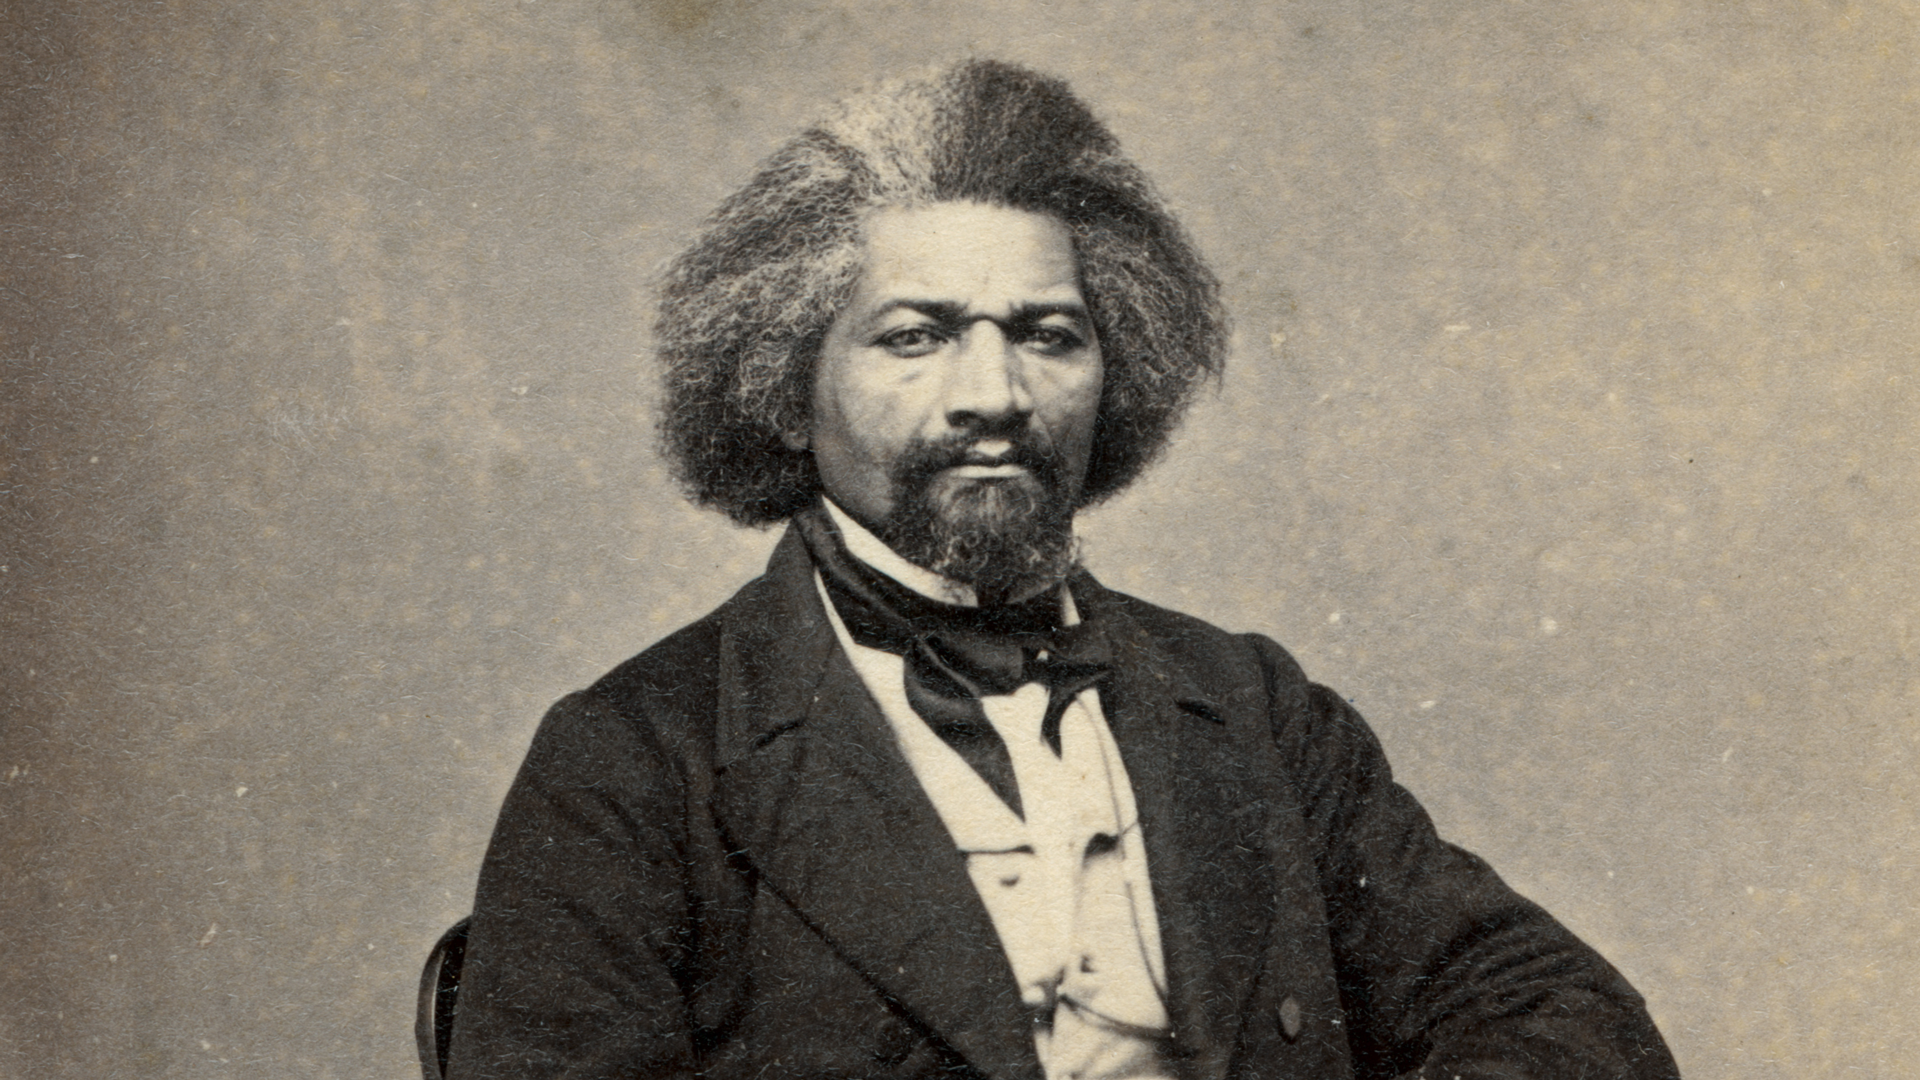 Photograhp of Frederick Douglas in a suit.